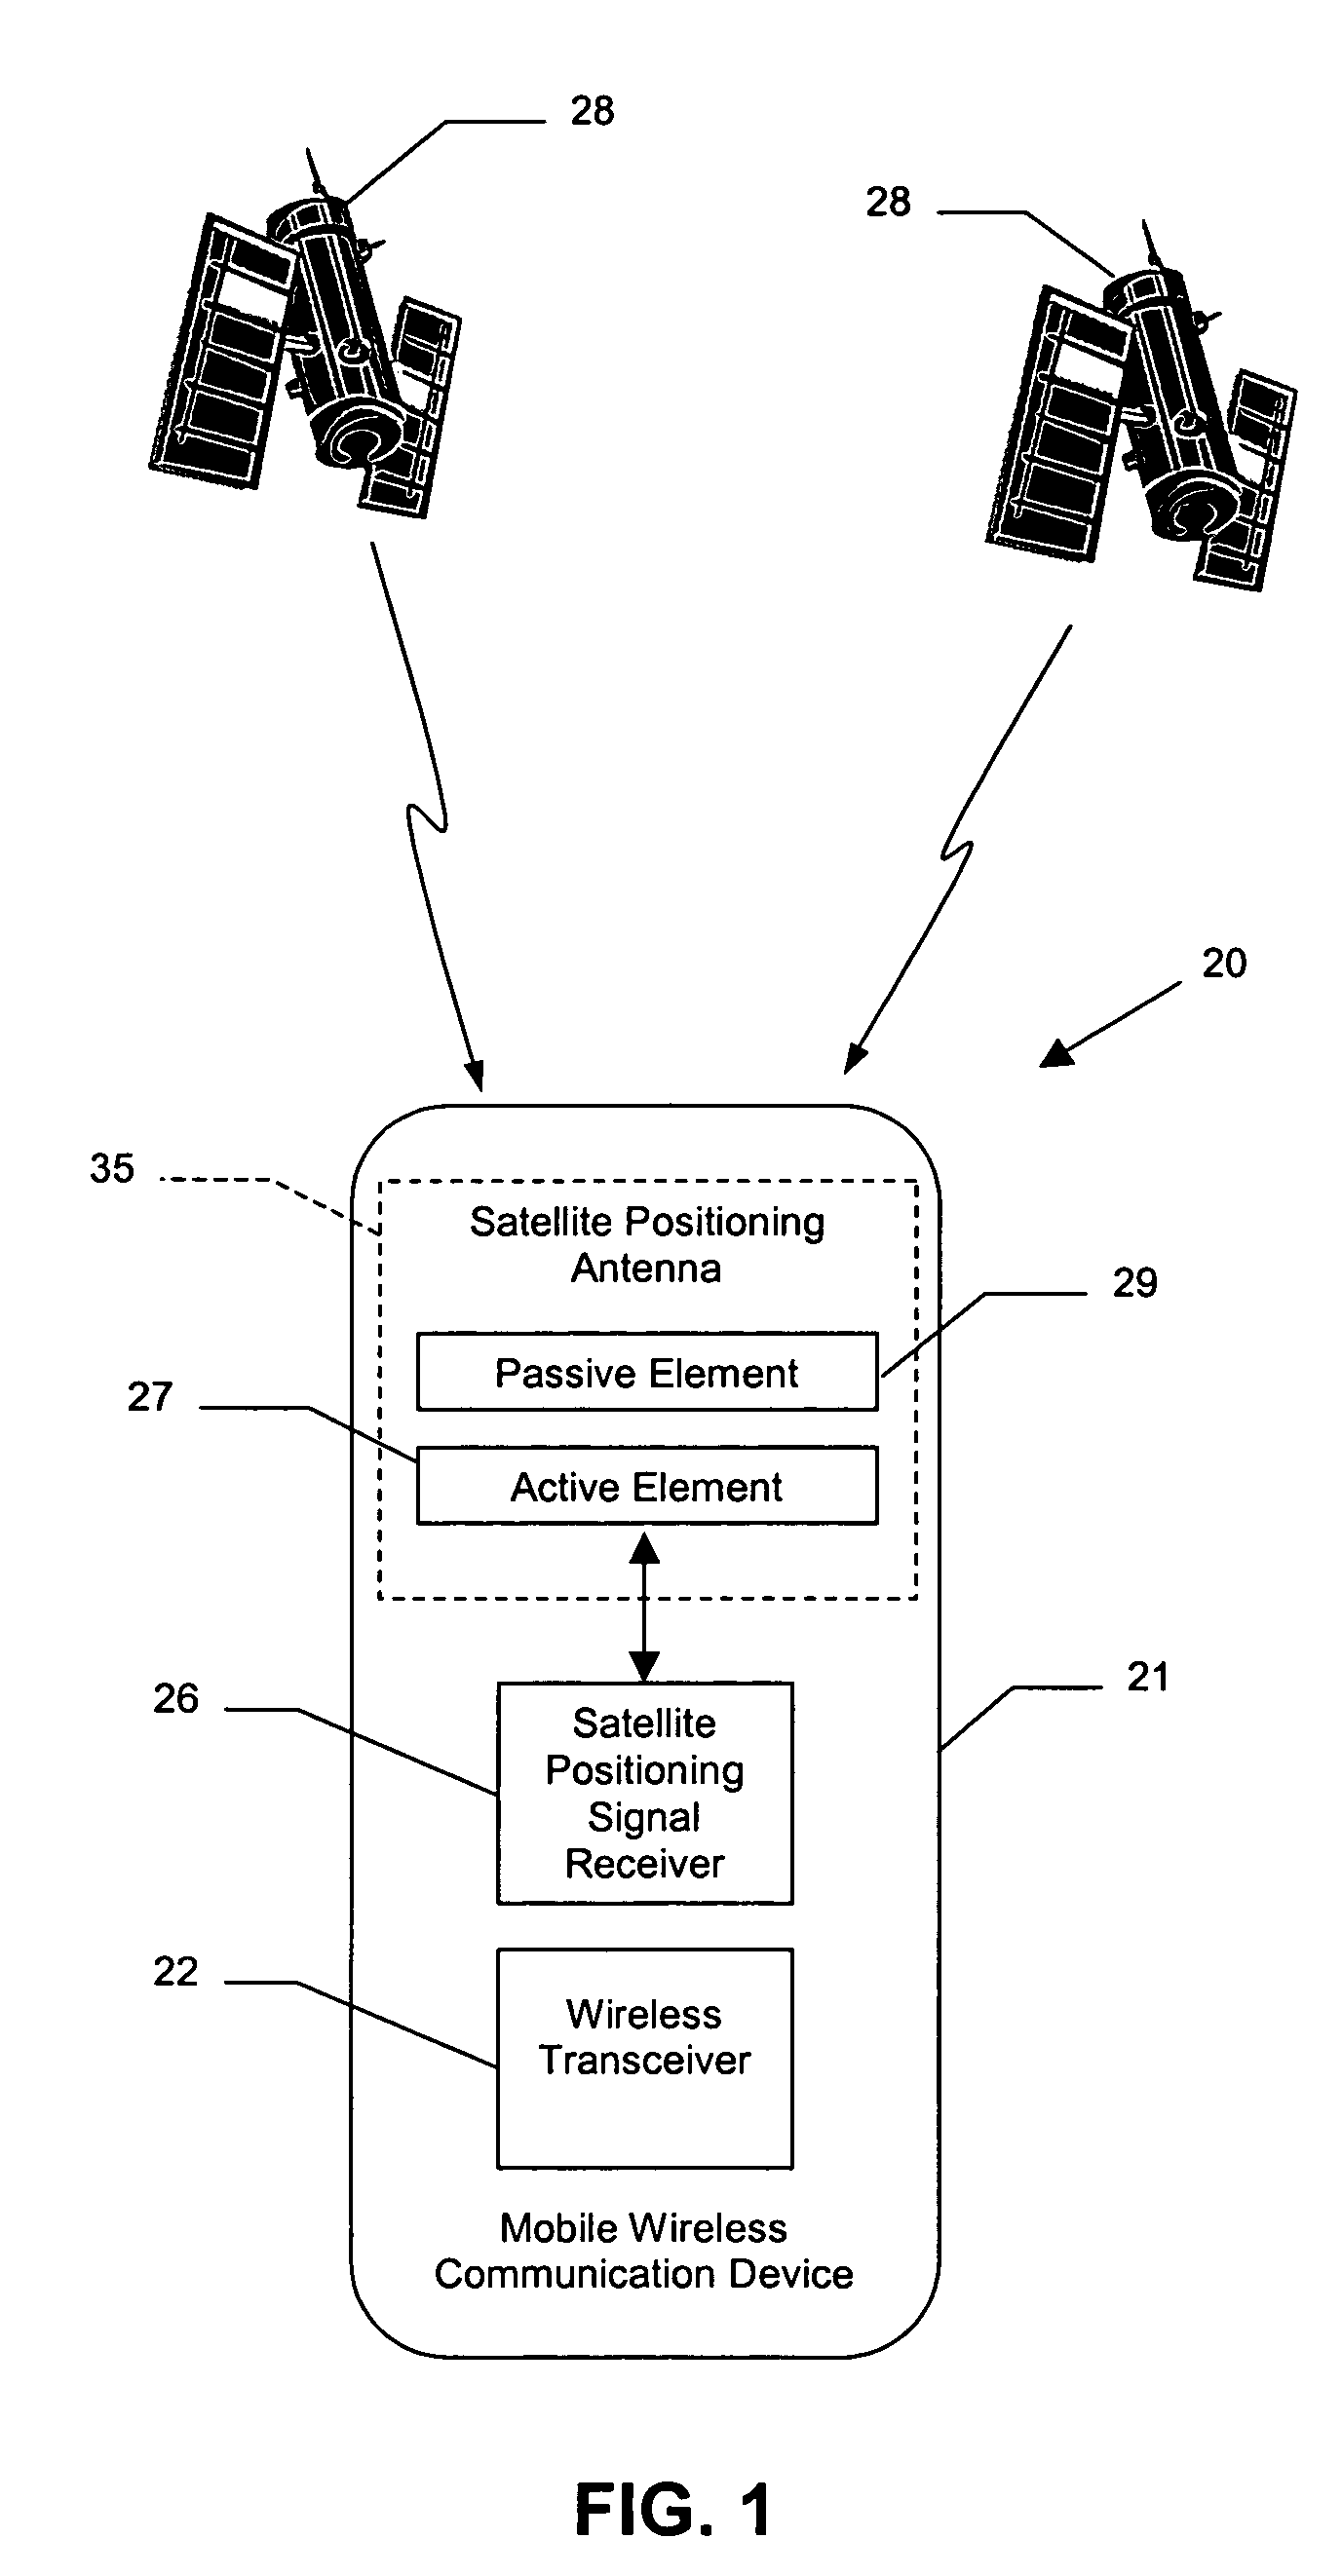 Mobile wireless communications device comprising a satellite positioning system antenna with active and passive elements and related methods